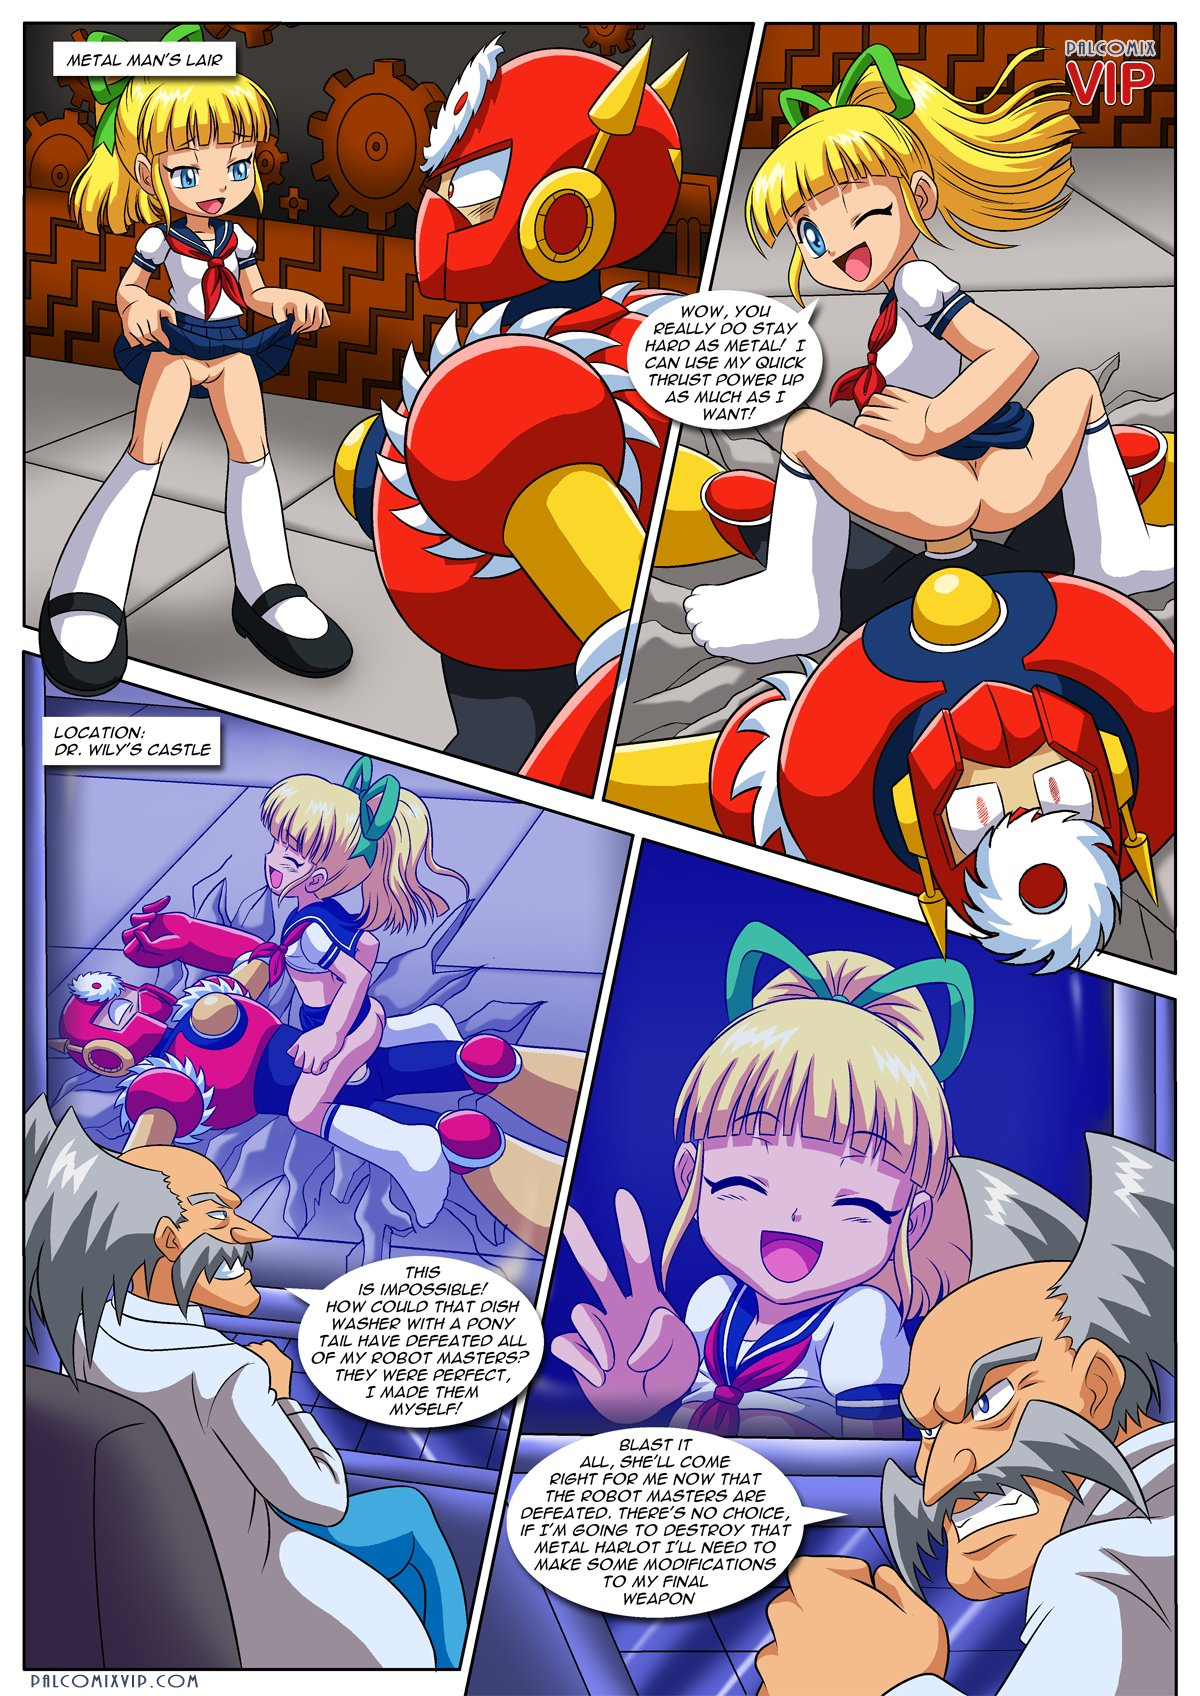 Rolling Buster 2 porn comics Oral sex, Anal Sex, Bikini, Double Penetration, Lolicon, Tentacles